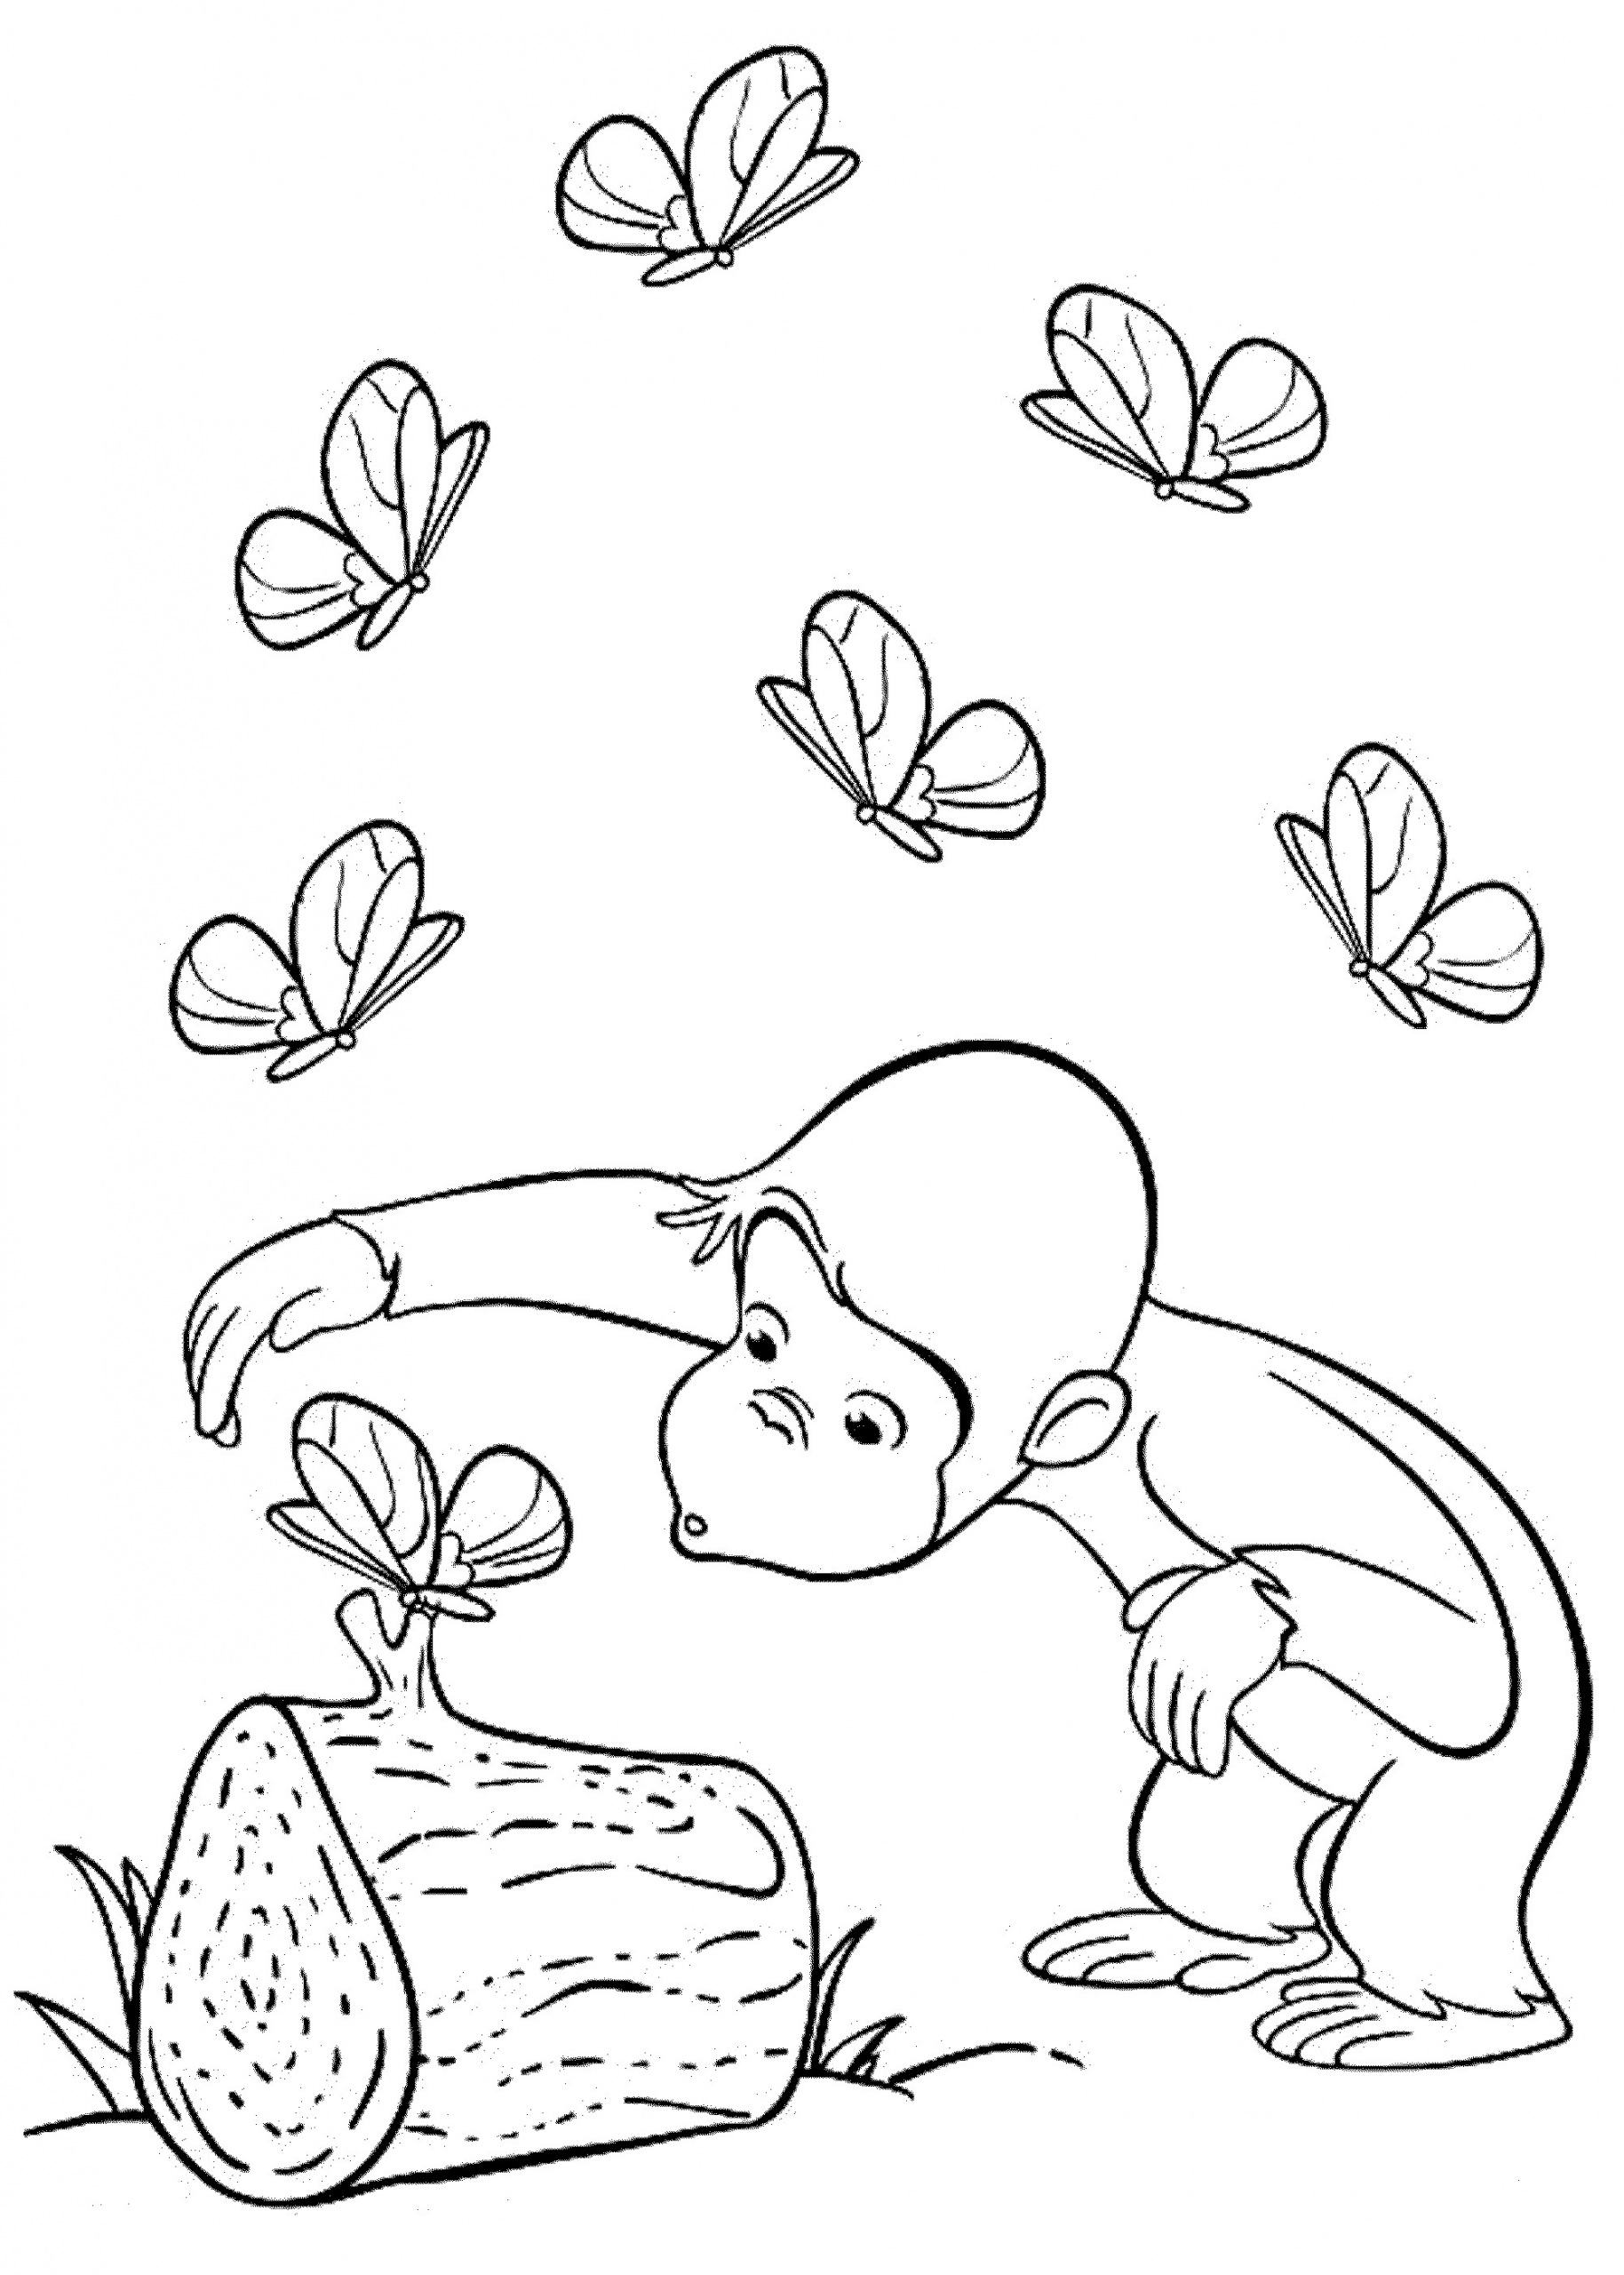 Best Coloring Pages For Kids
 Curious George Coloring Pages Best Coloring Pages For Kids